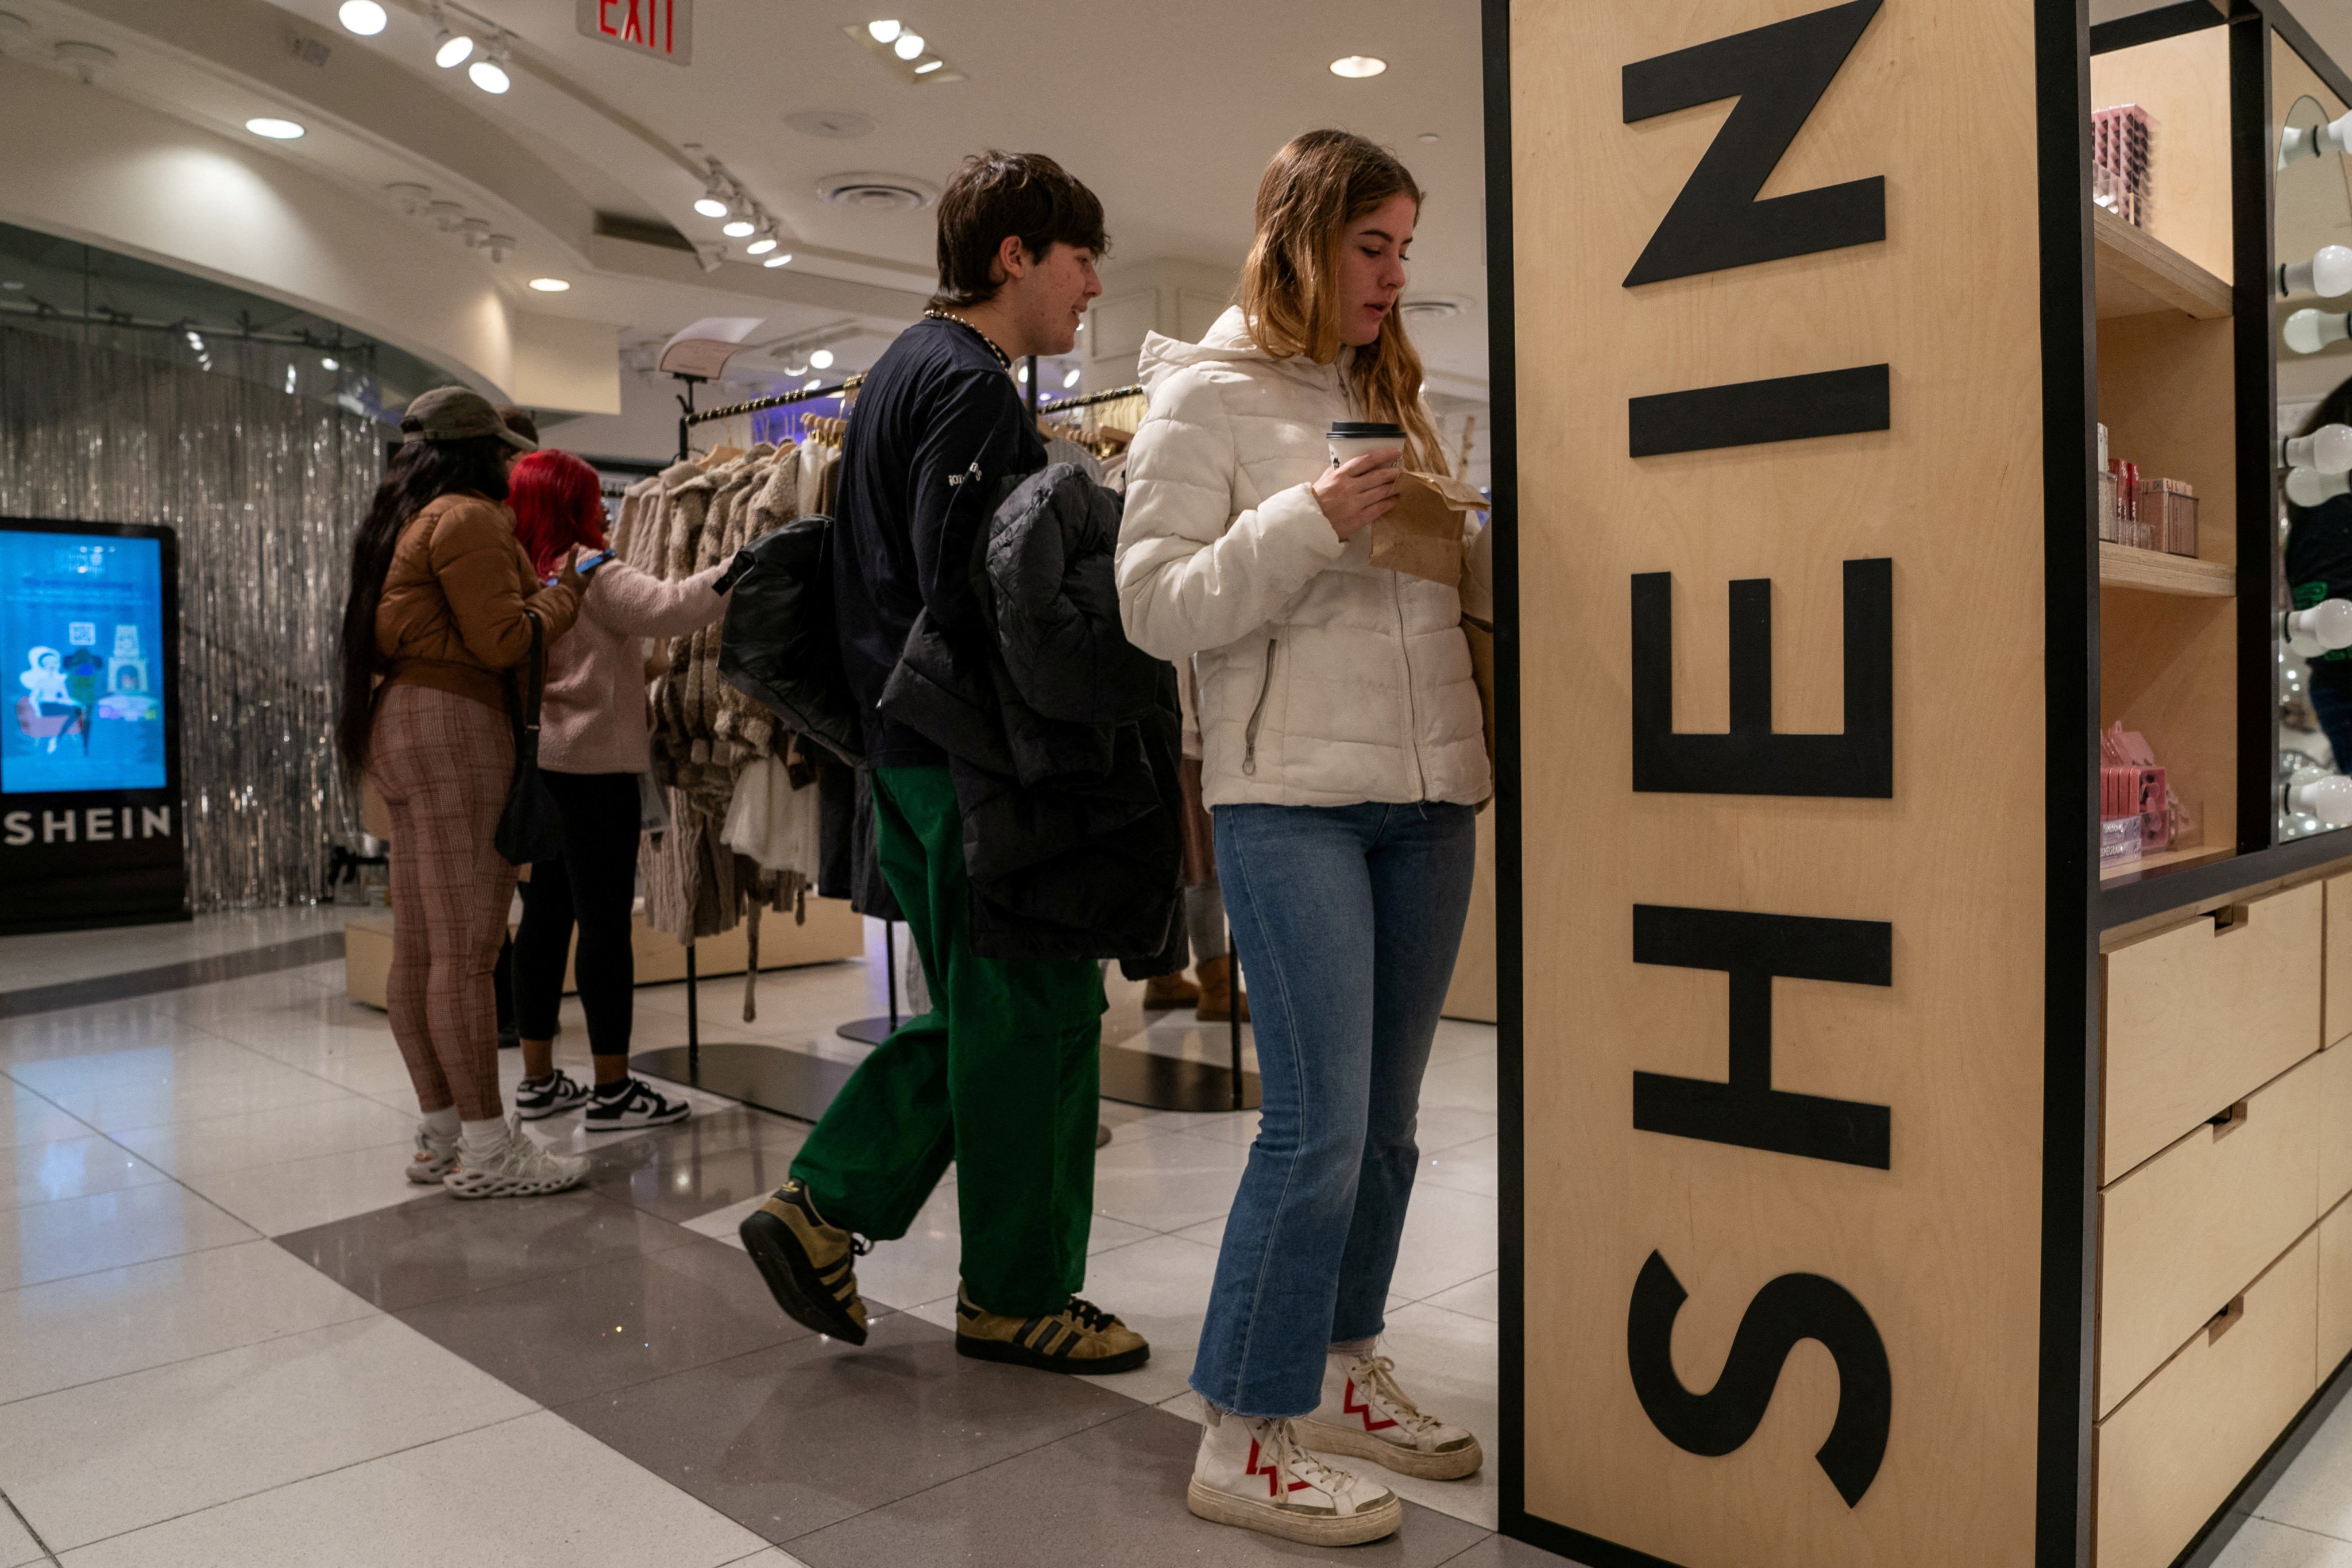 Shein's holiday pop-up shop seen inside retailer Forever 21's Times Squares store in New York on November 10. Photo: Reuters